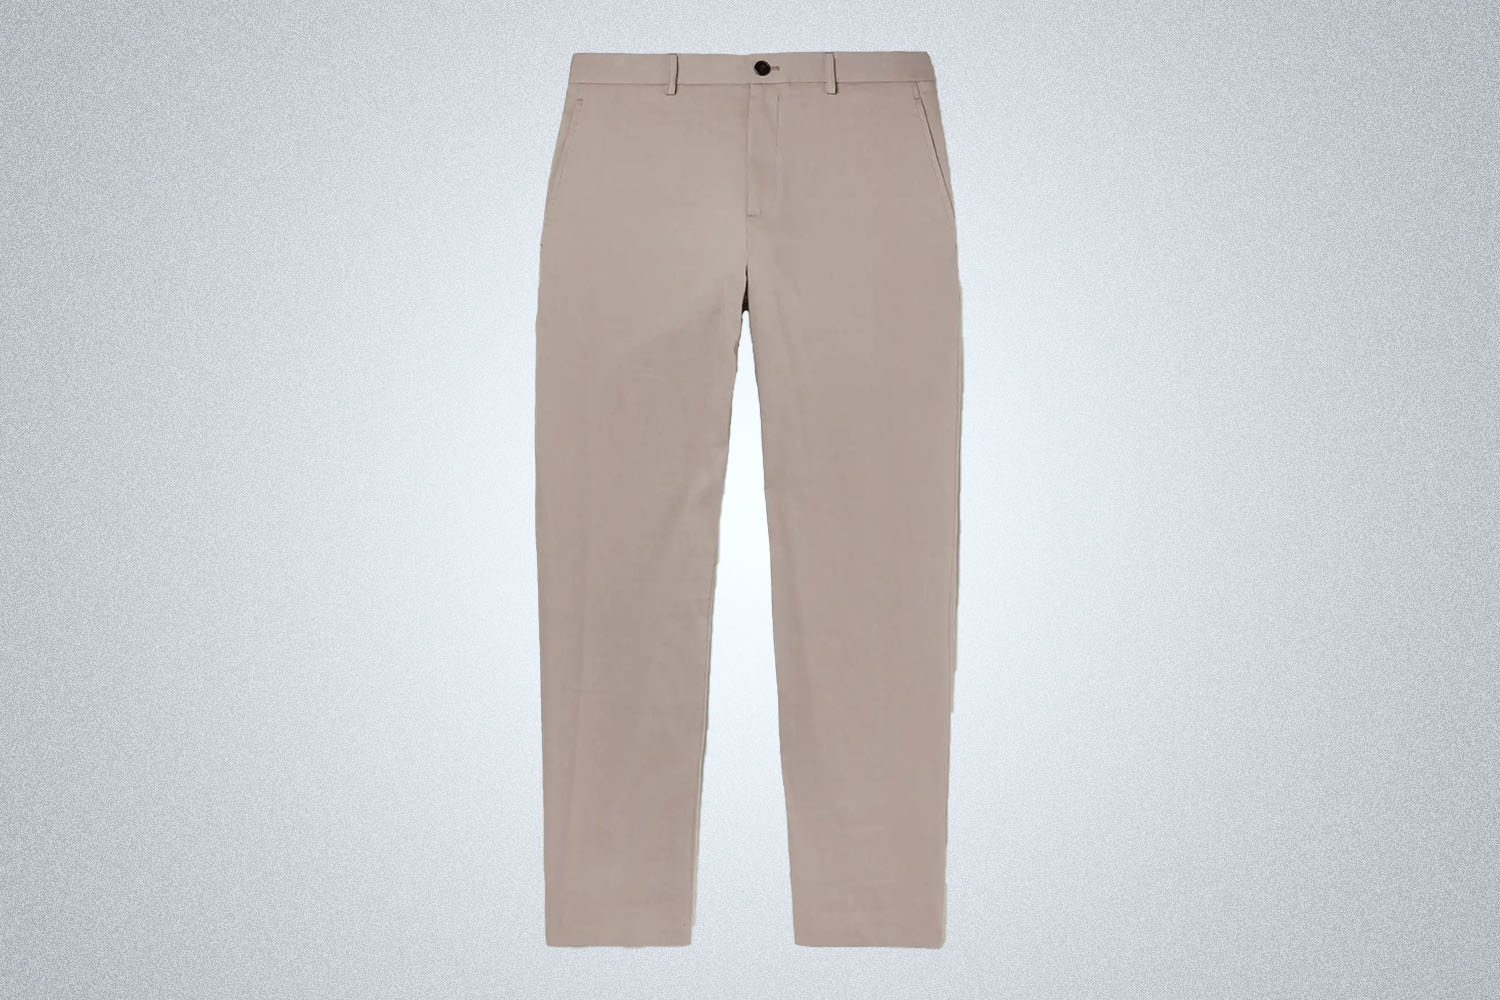 a pair of beige trousers from Theory on a grey background